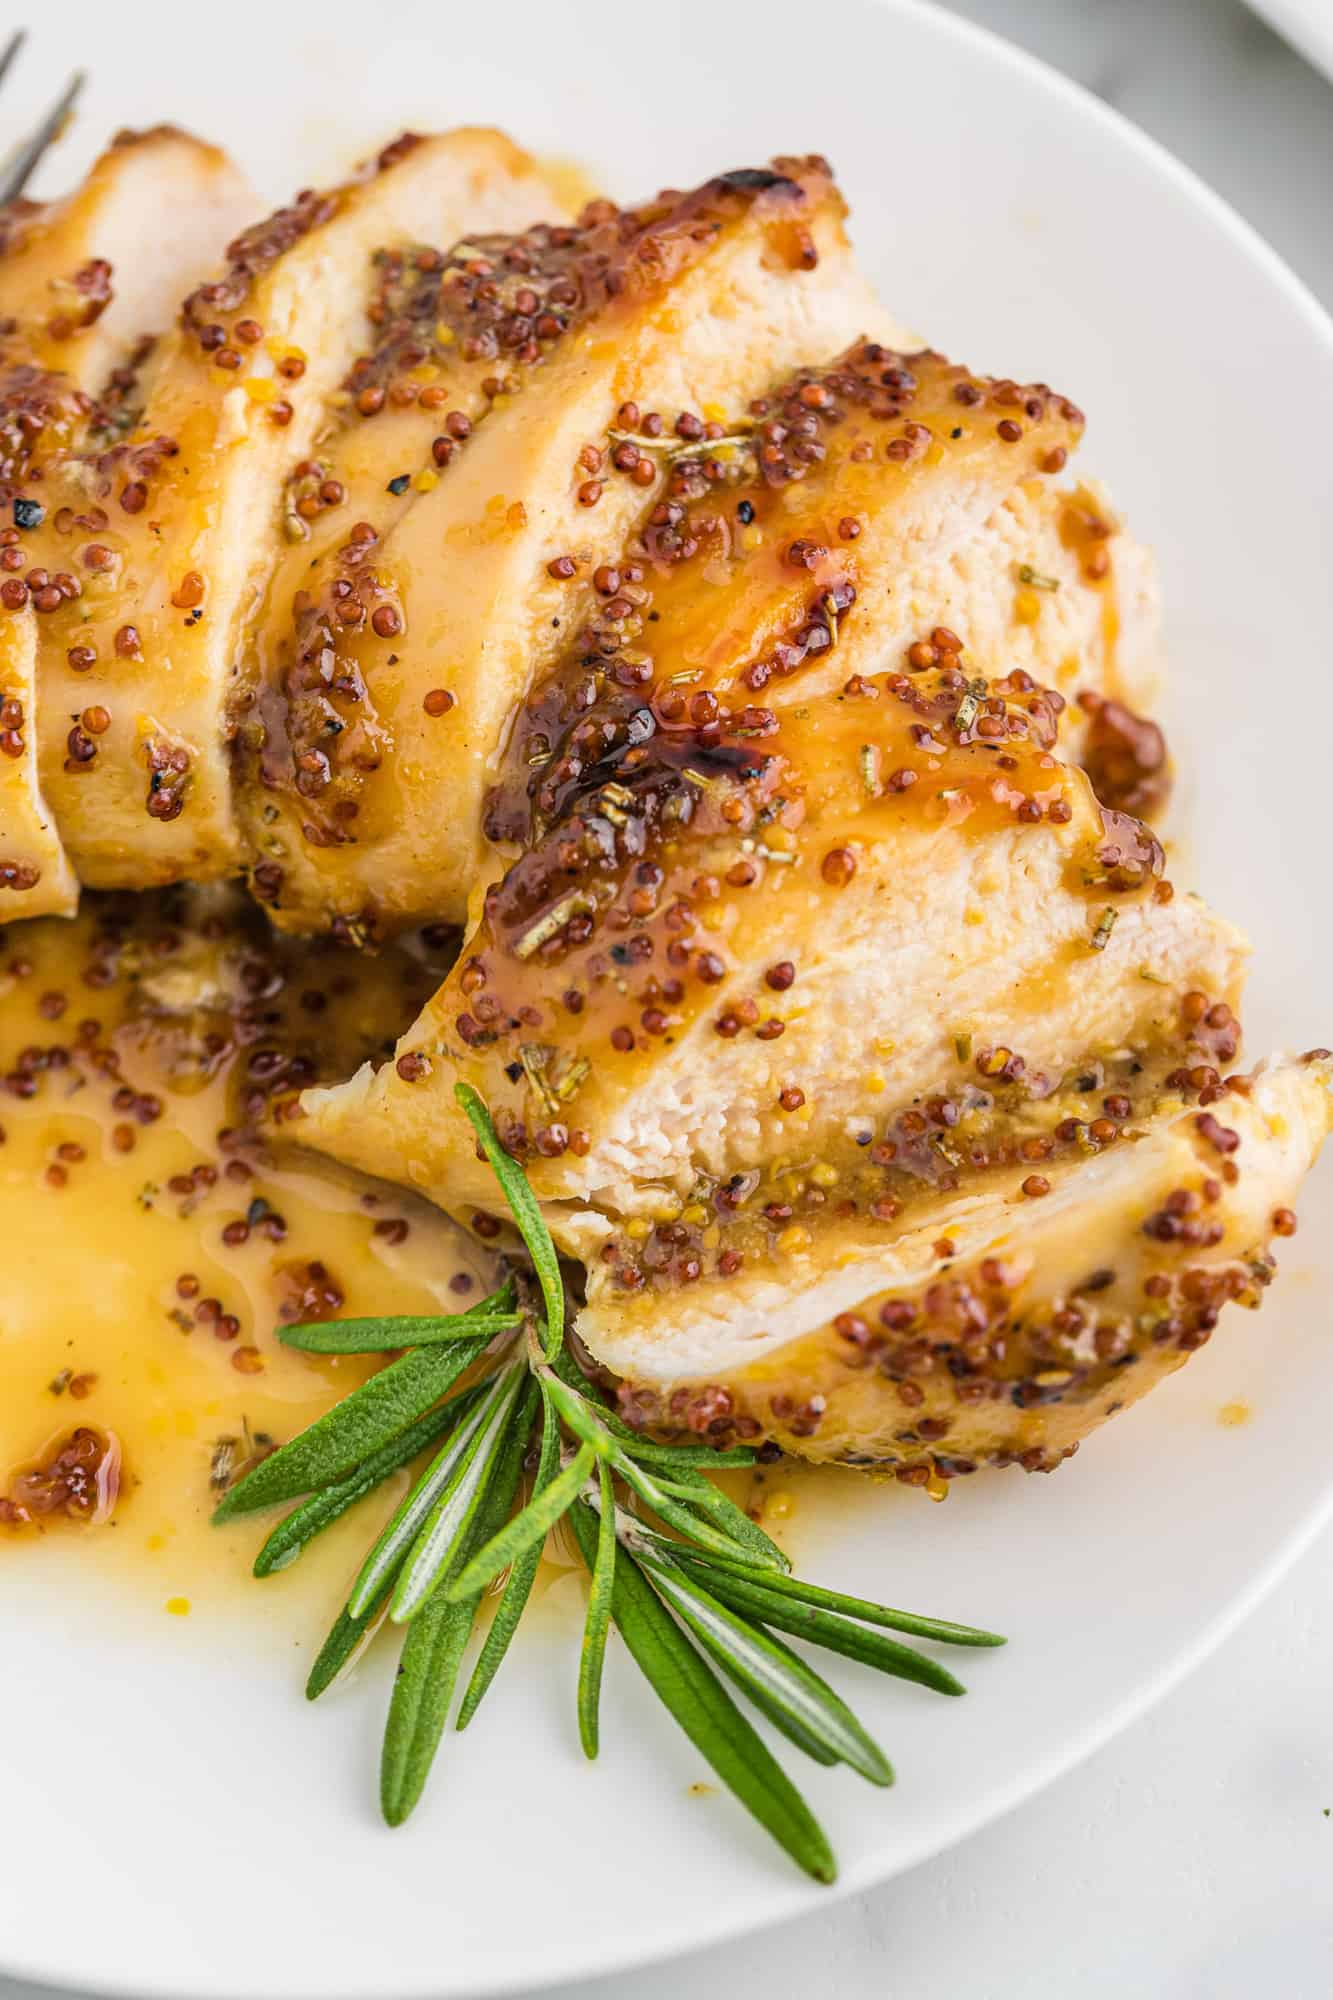 Sliced chicken breast on a plate with honey mustard sauce and fresh rosemary.